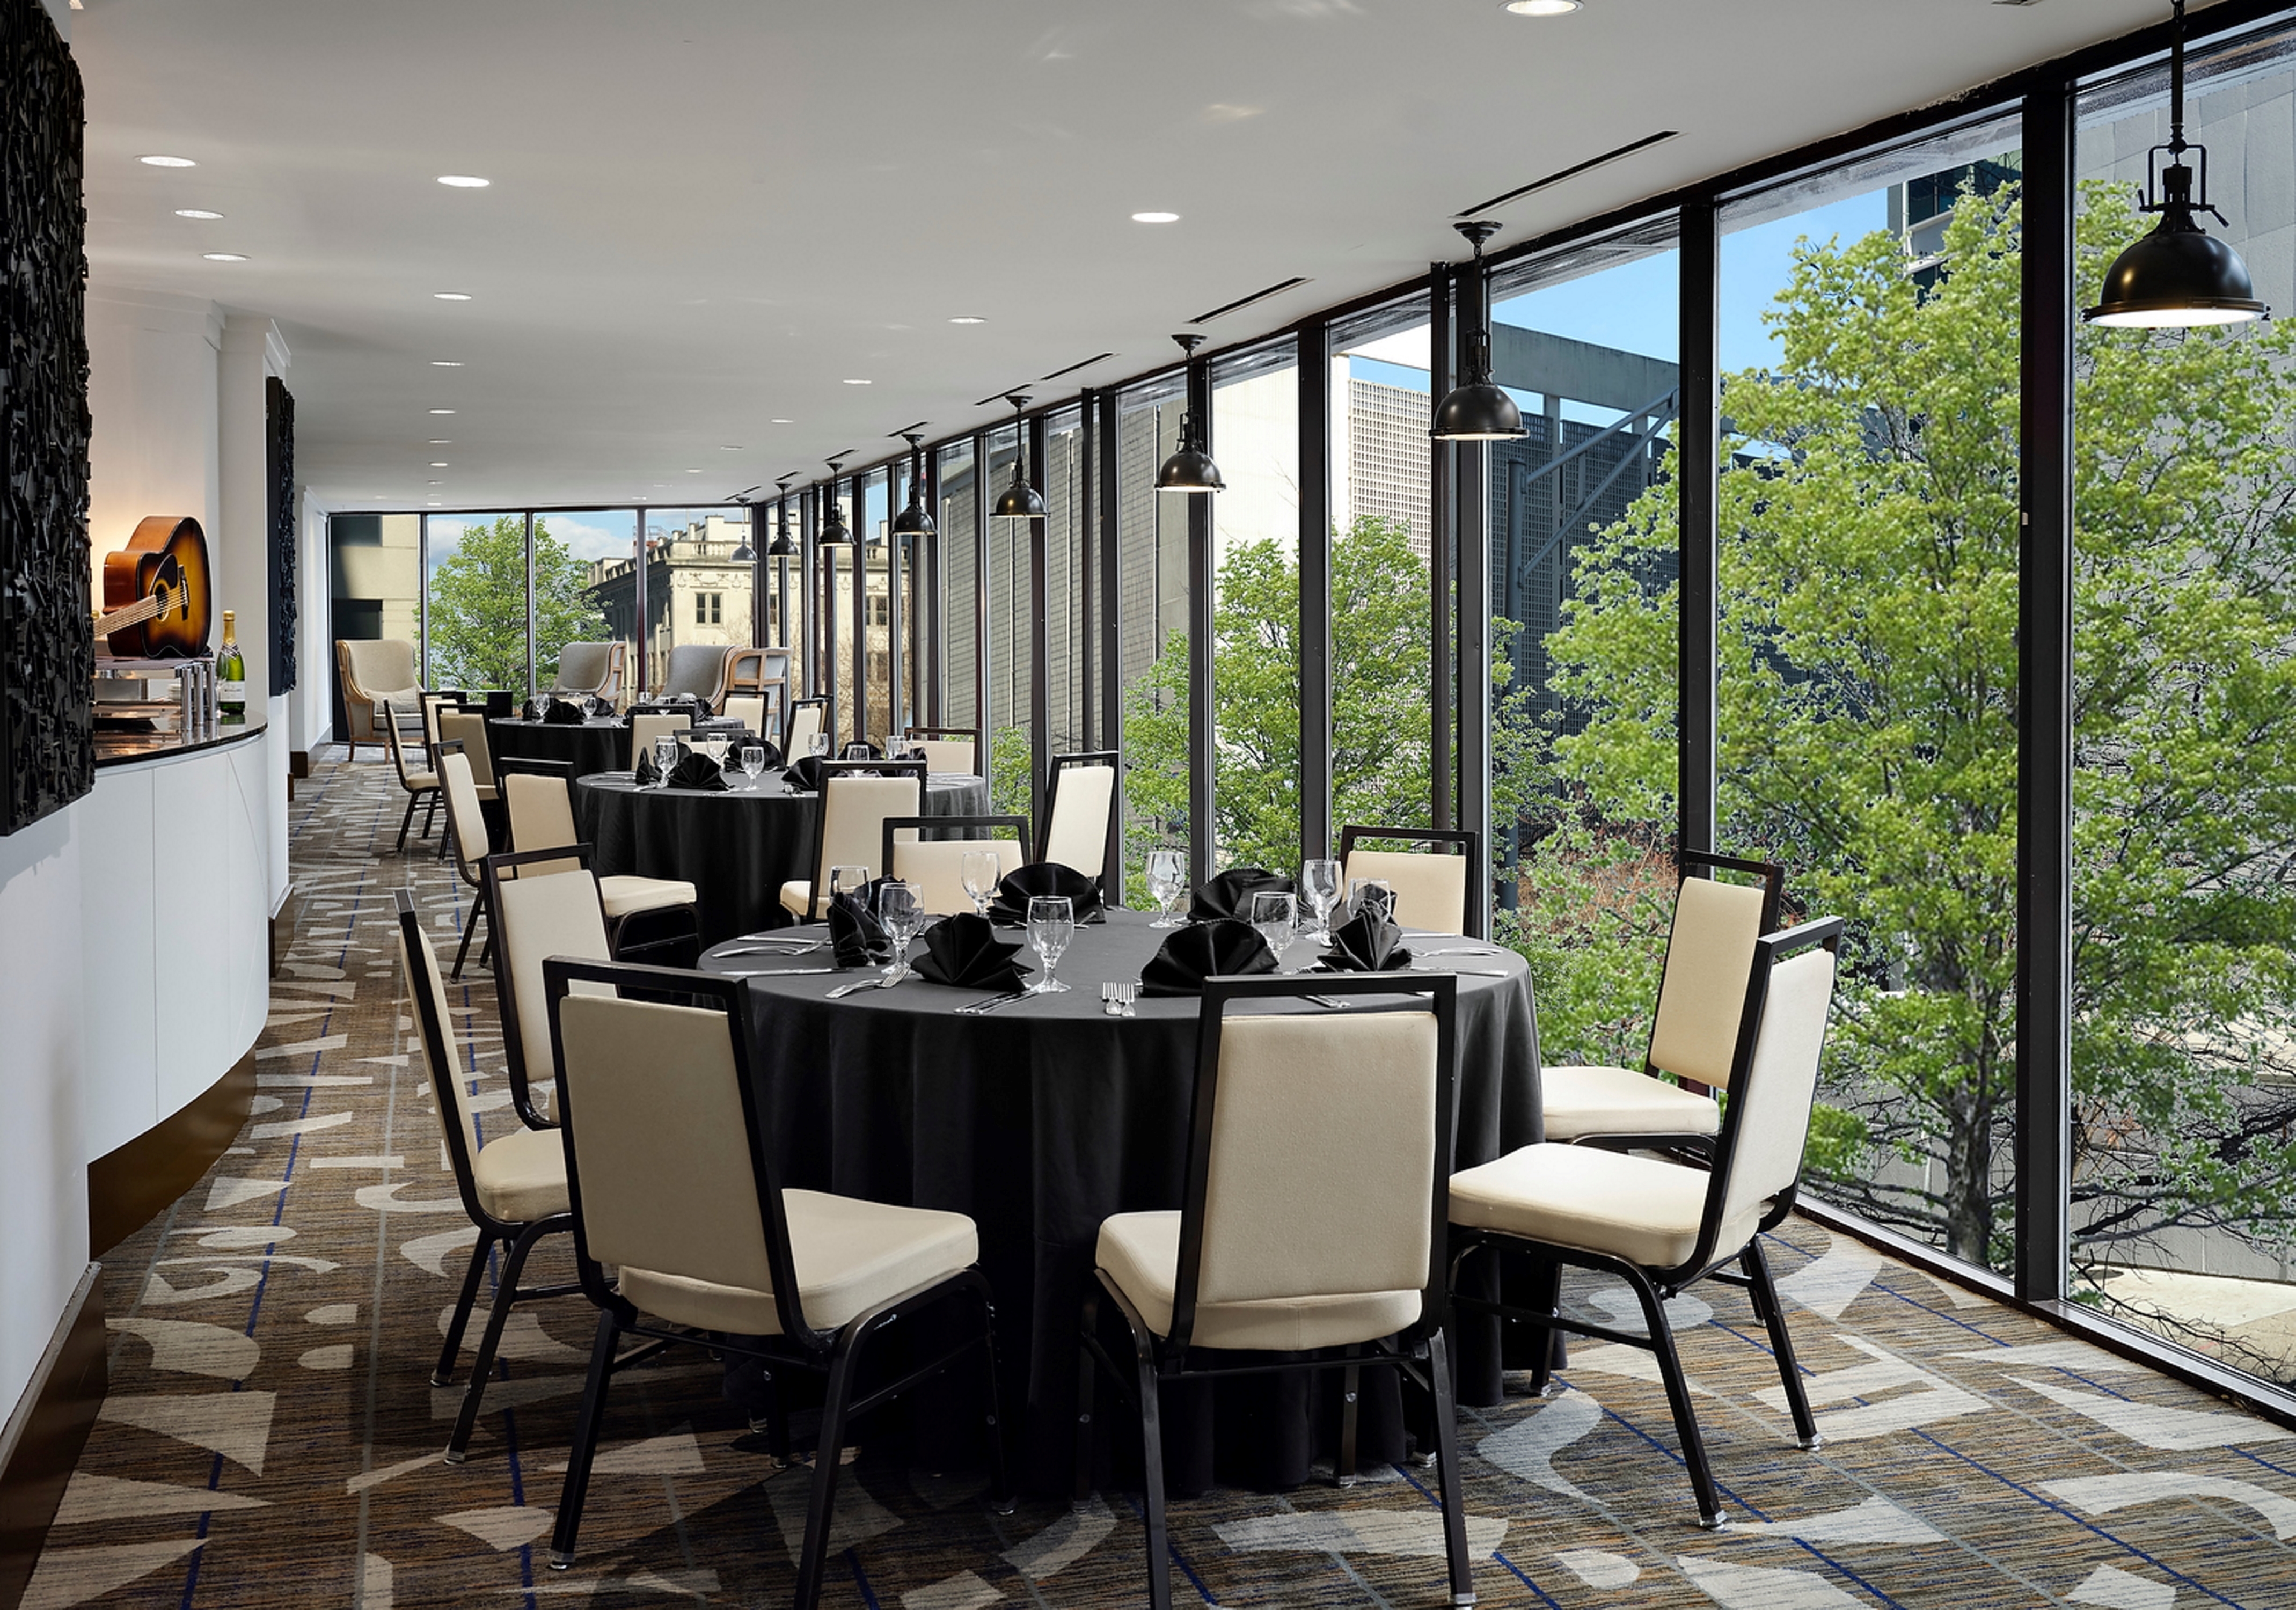 event space with round tables and chairs